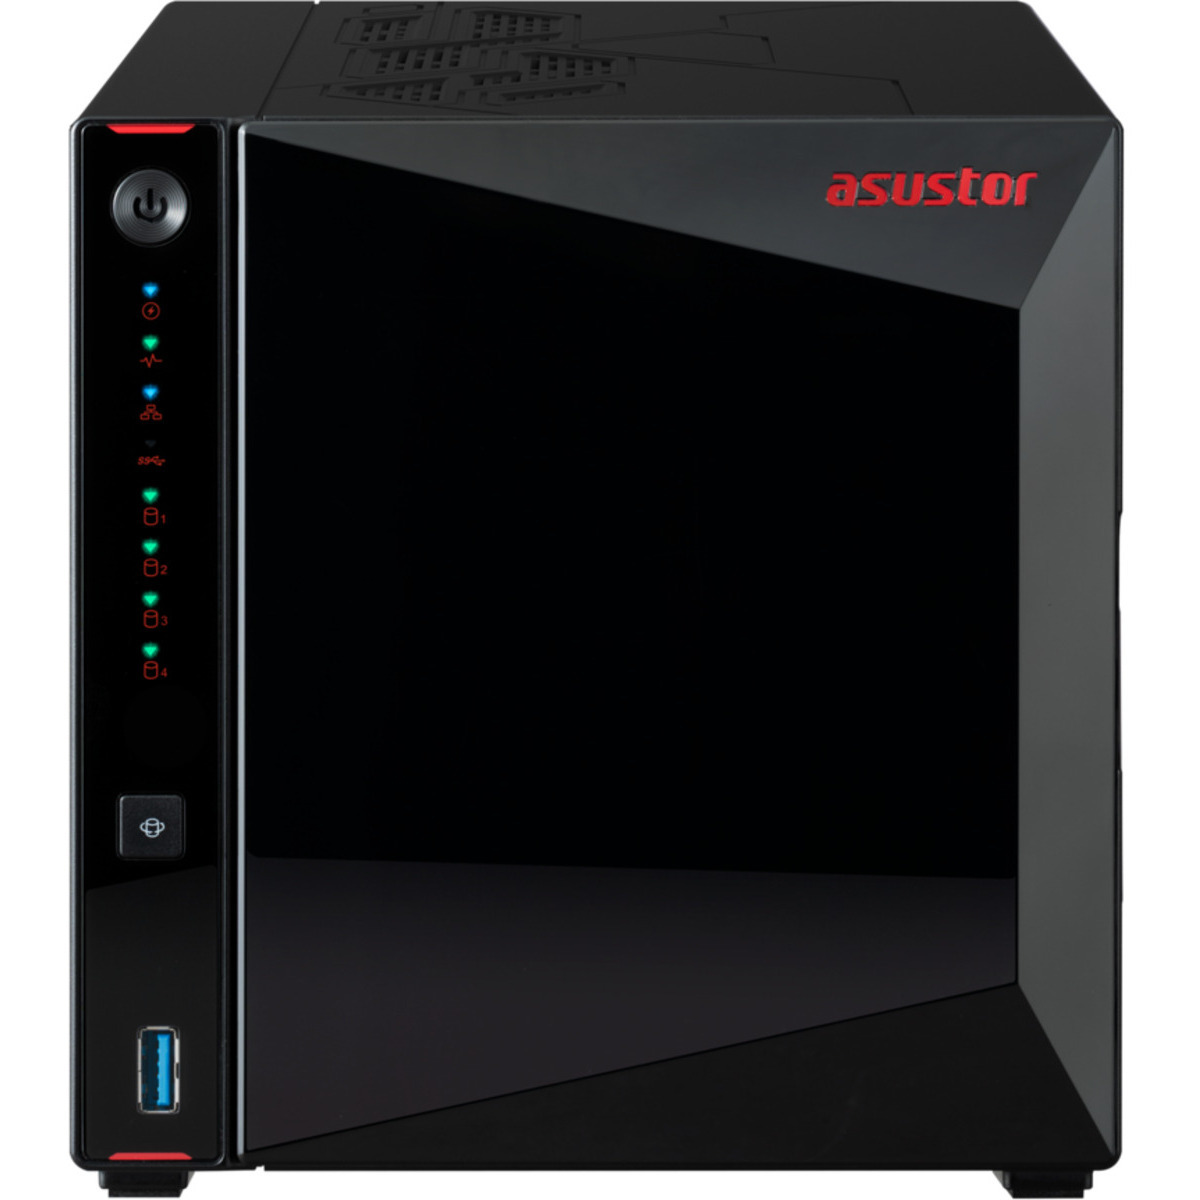 ASUSTOR Nimbustor 4 Gen2 AS5404T 24tb 4-Bay Desktop Multimedia / Power User / Business NAS - Network Attached Storage Device 2x12tb Seagate IronWolf ST12000VN0008 3.5 7200rpm SATA 6Gb/s HDD NAS Class Drives Installed - Burn-In Tested - FREE RAM UPGRADE Nimbustor 4 Gen2 AS5404T